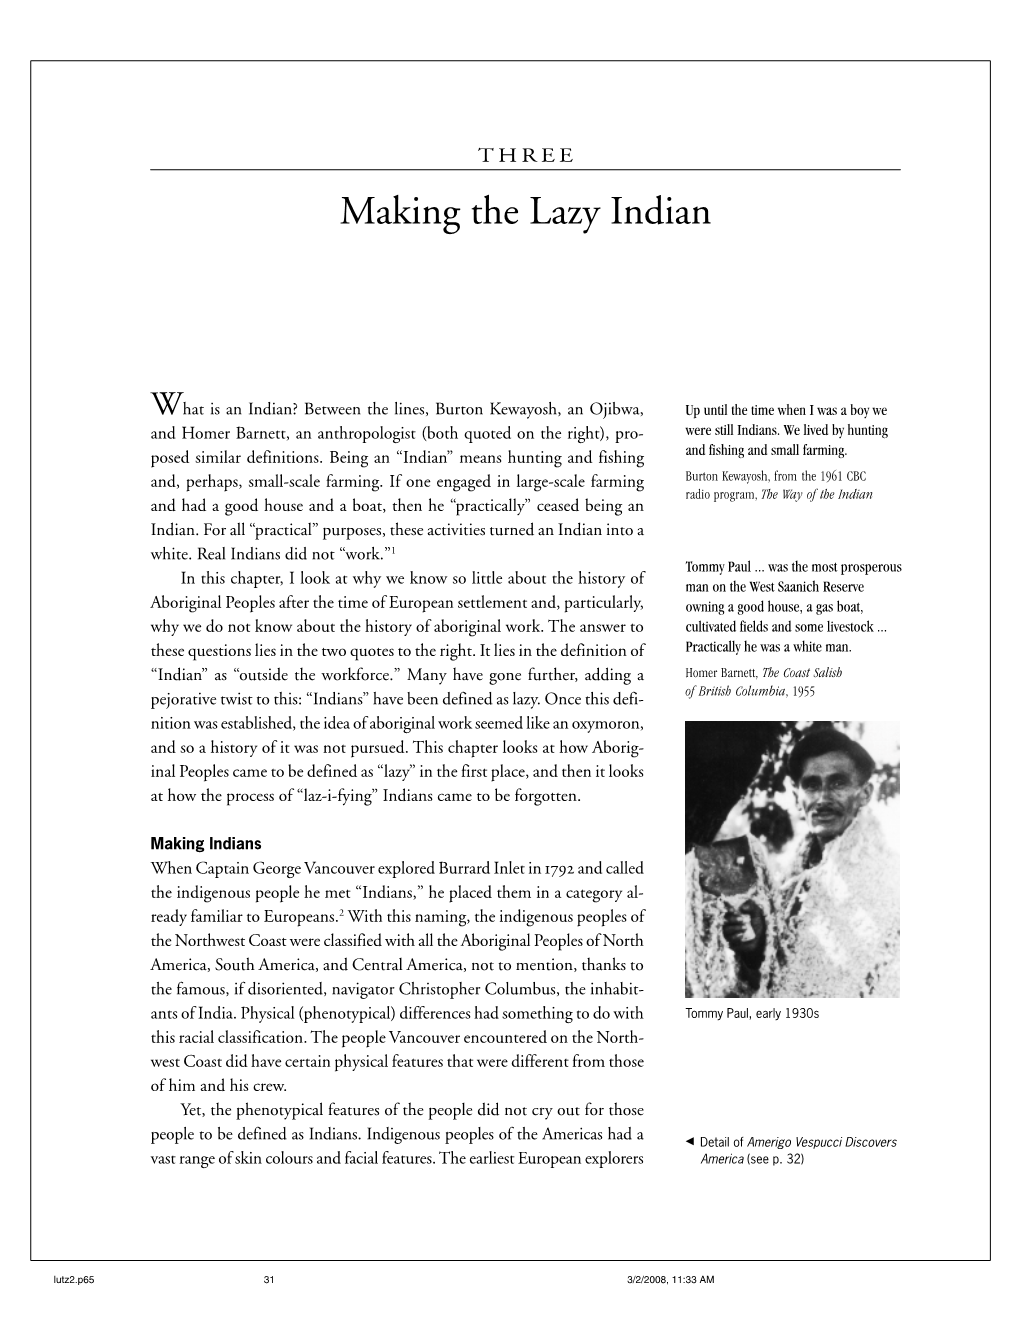 Making the Lazy Indian